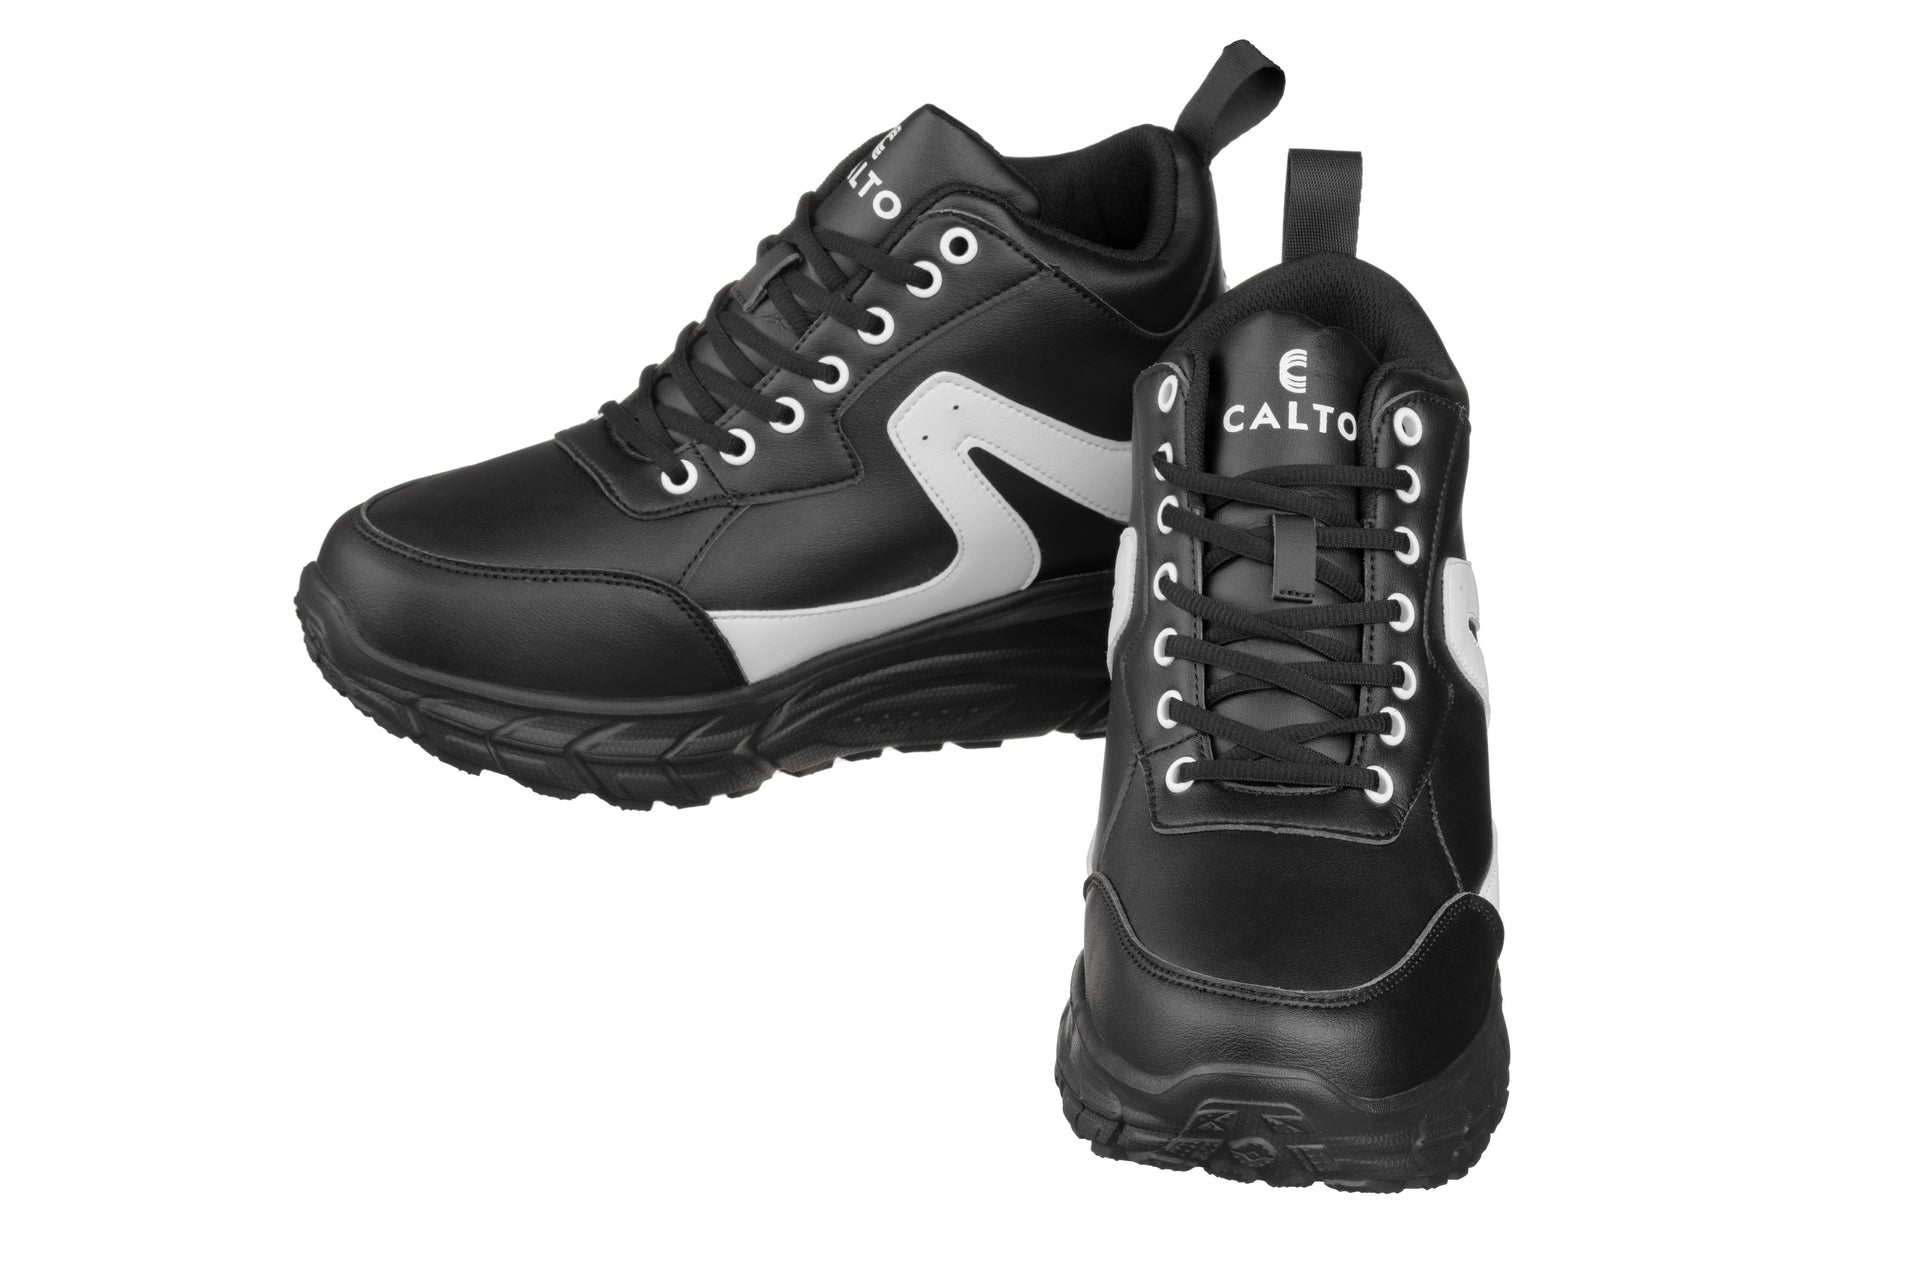 Elevator shoes height increase CALTO - S22772 - 4 Inches Taller (Black/White) - Hiking Style Boots